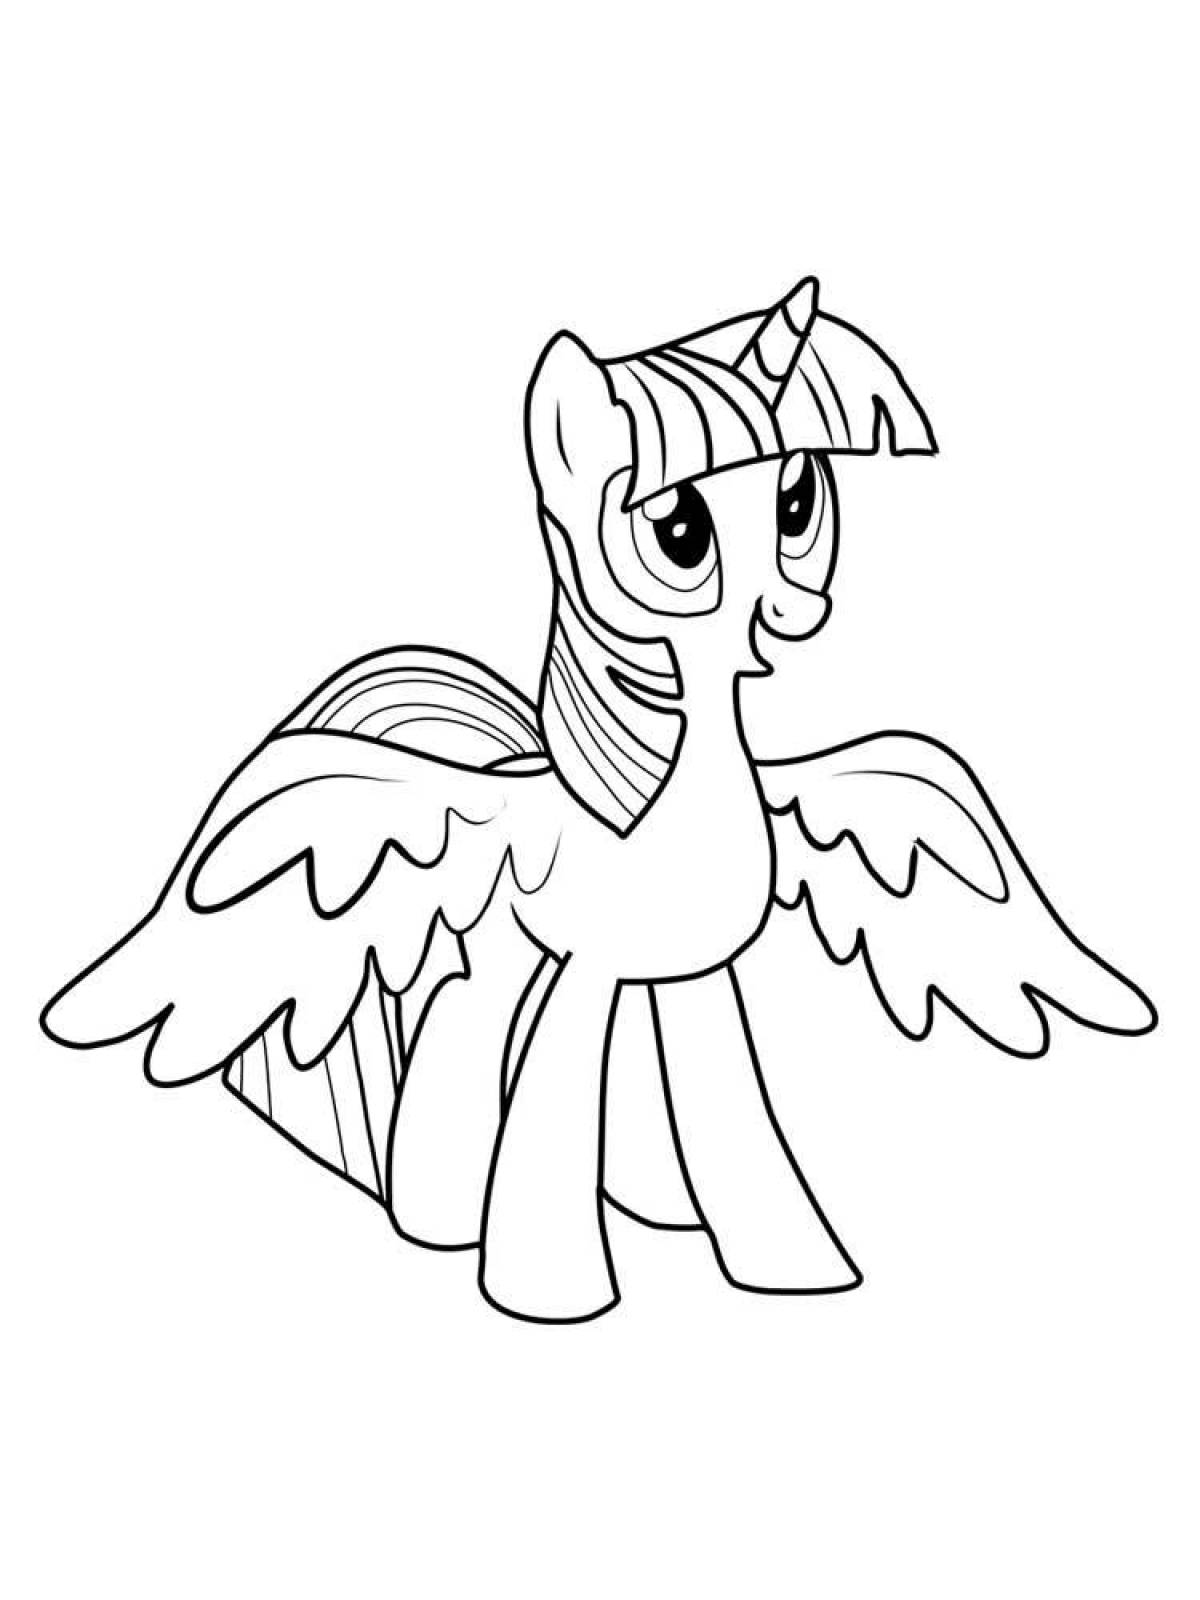 Adorable pony sparkle coloring book